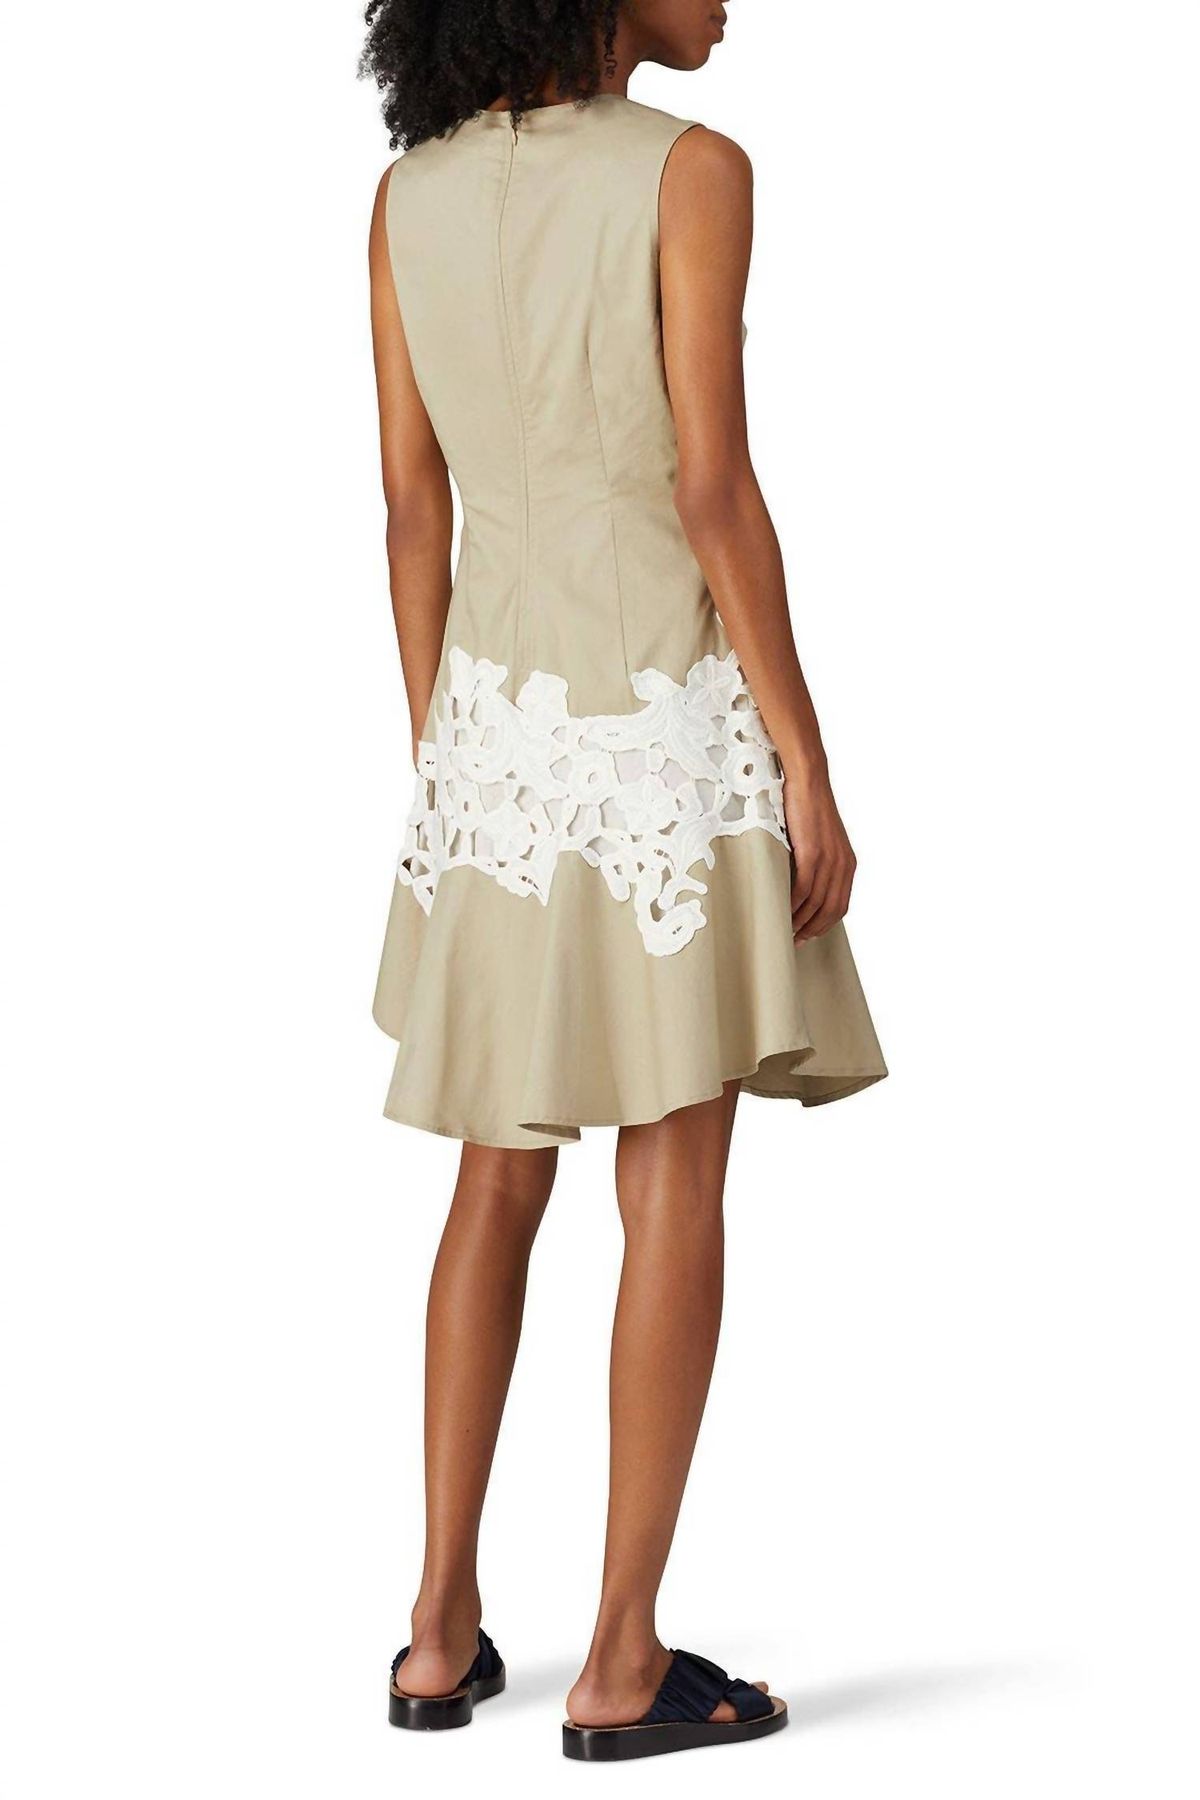 Style 1-3036452524-1668-1 Derek Lam 10 Crosby Plus Size 46 Lace Nude Cocktail Dress on Queenly